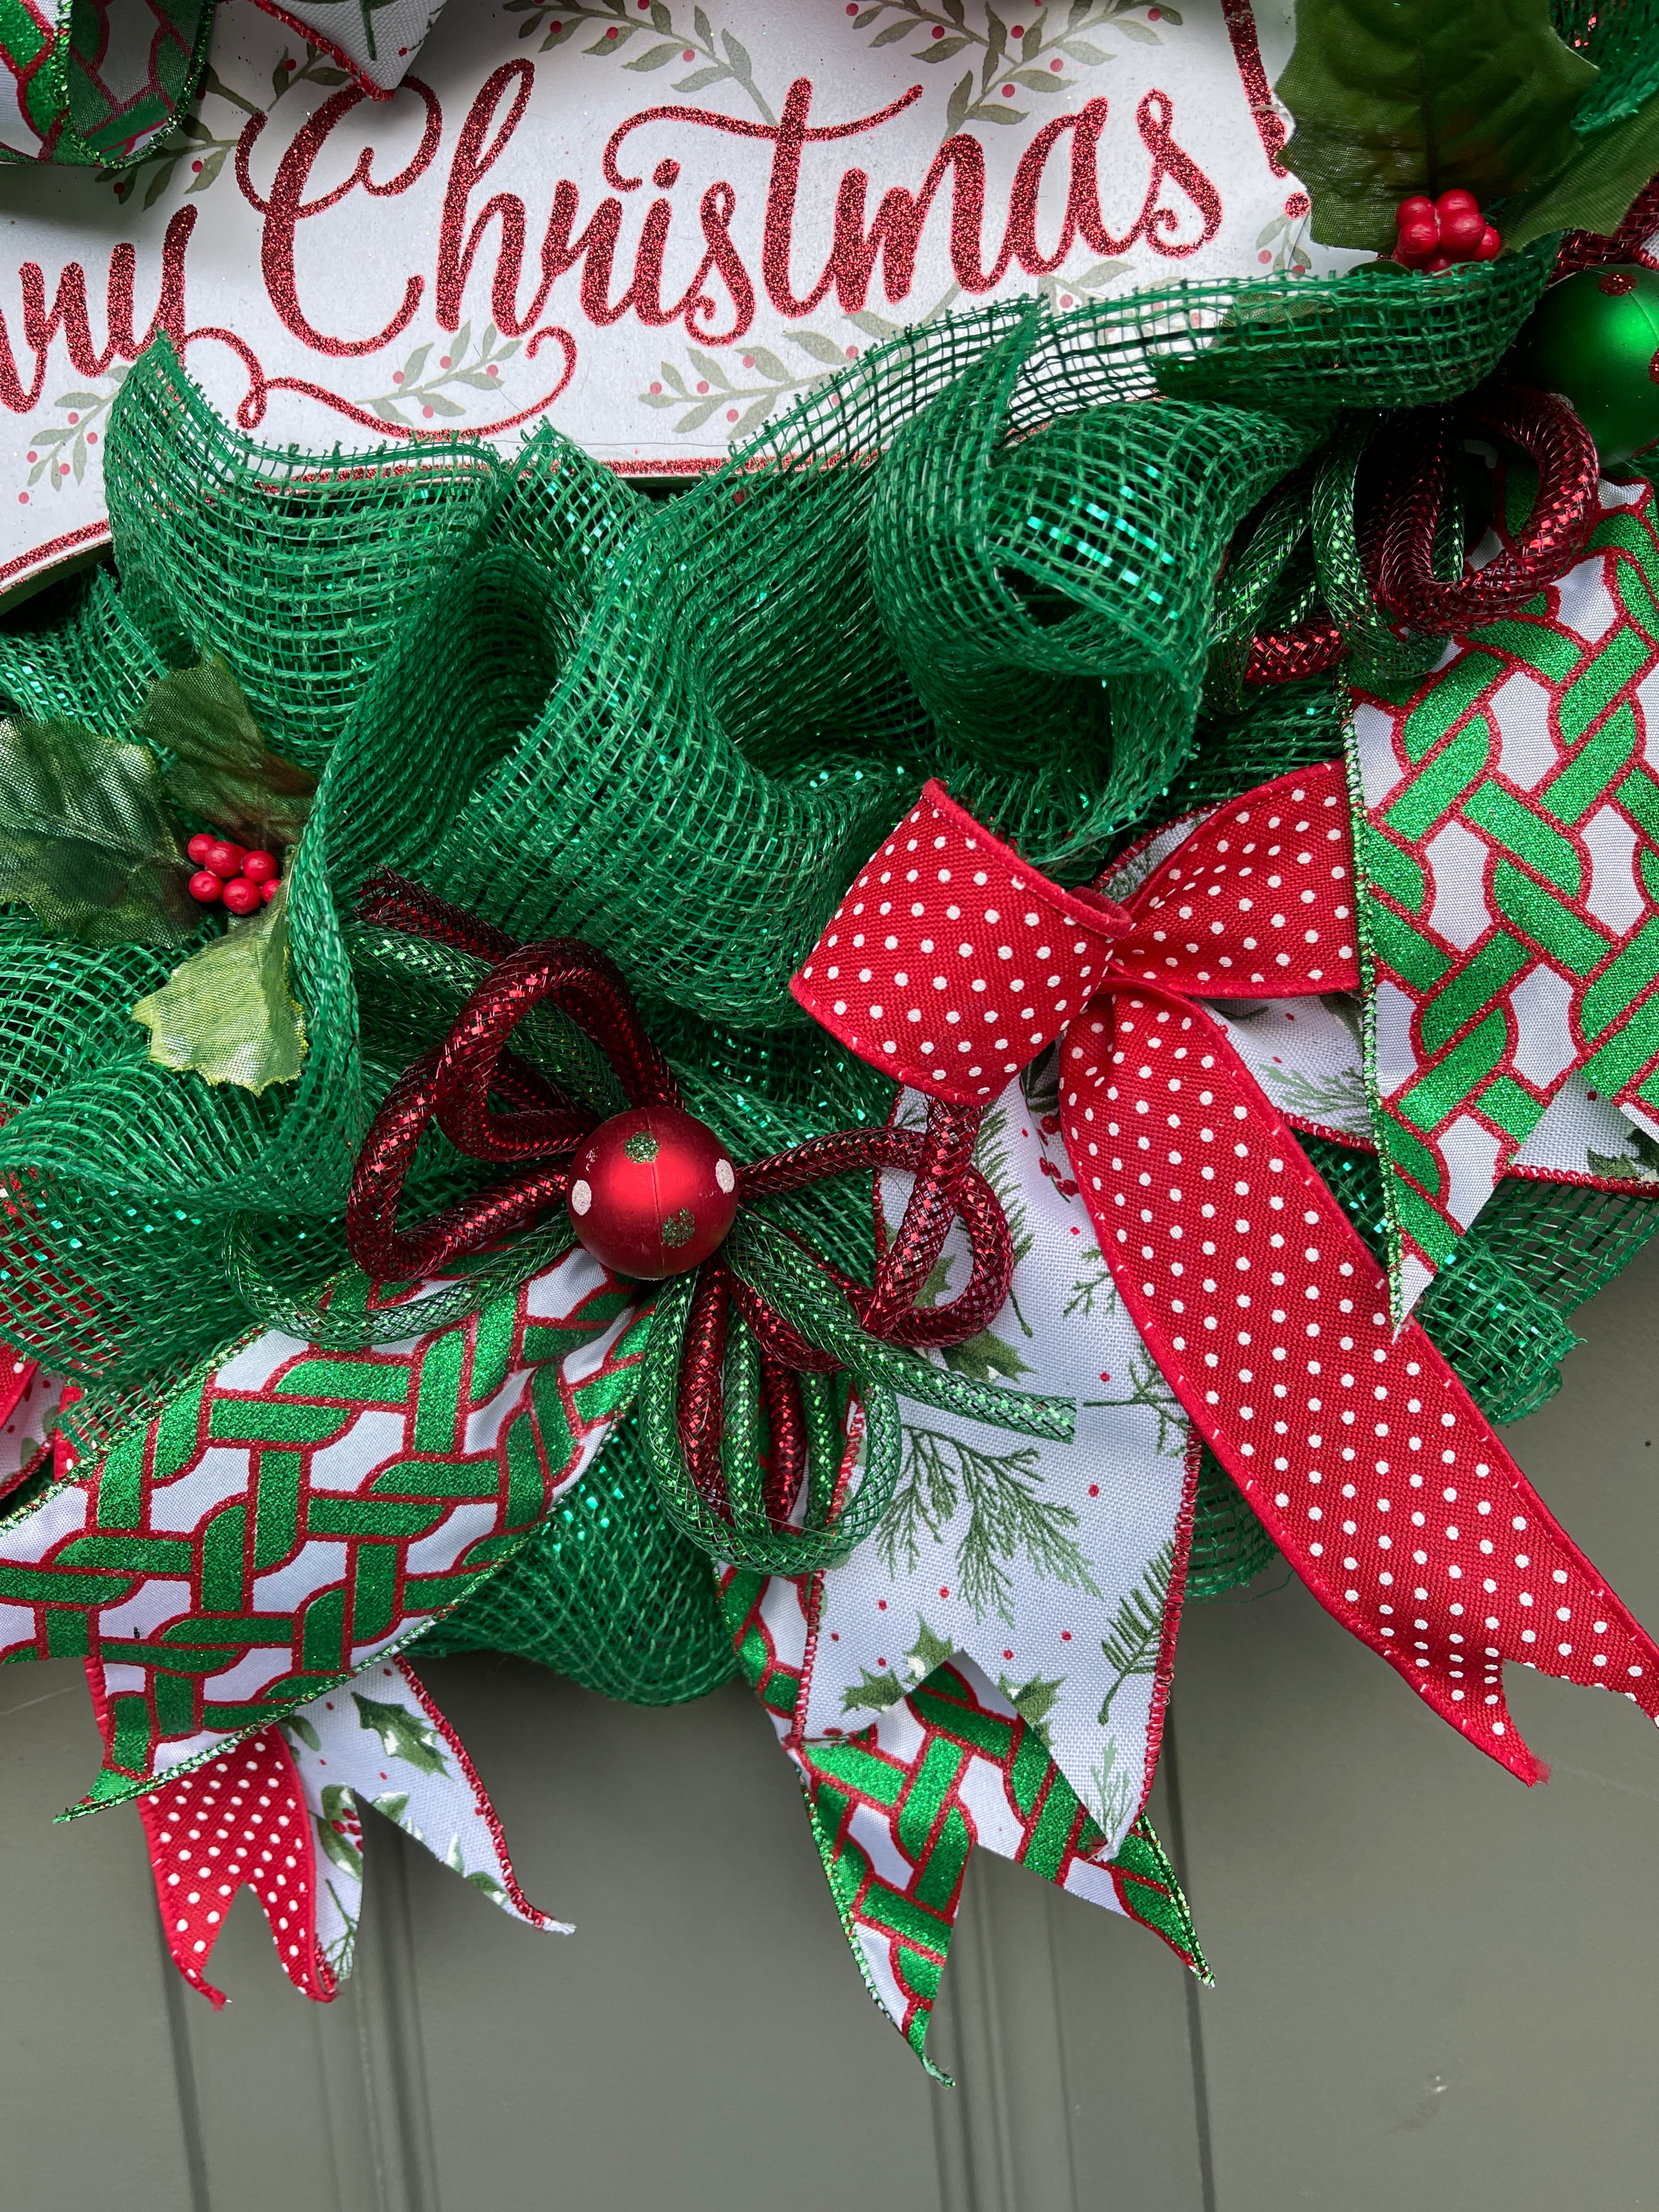 Close Up Details of Ribbons on the Edge of the Merry Christmas Wreath with Balls of White with Red and Green Polka Dots, Red Ribbon with White Polka Dots, Red and Green Flex Tubing and Mistletoe printed ribbons